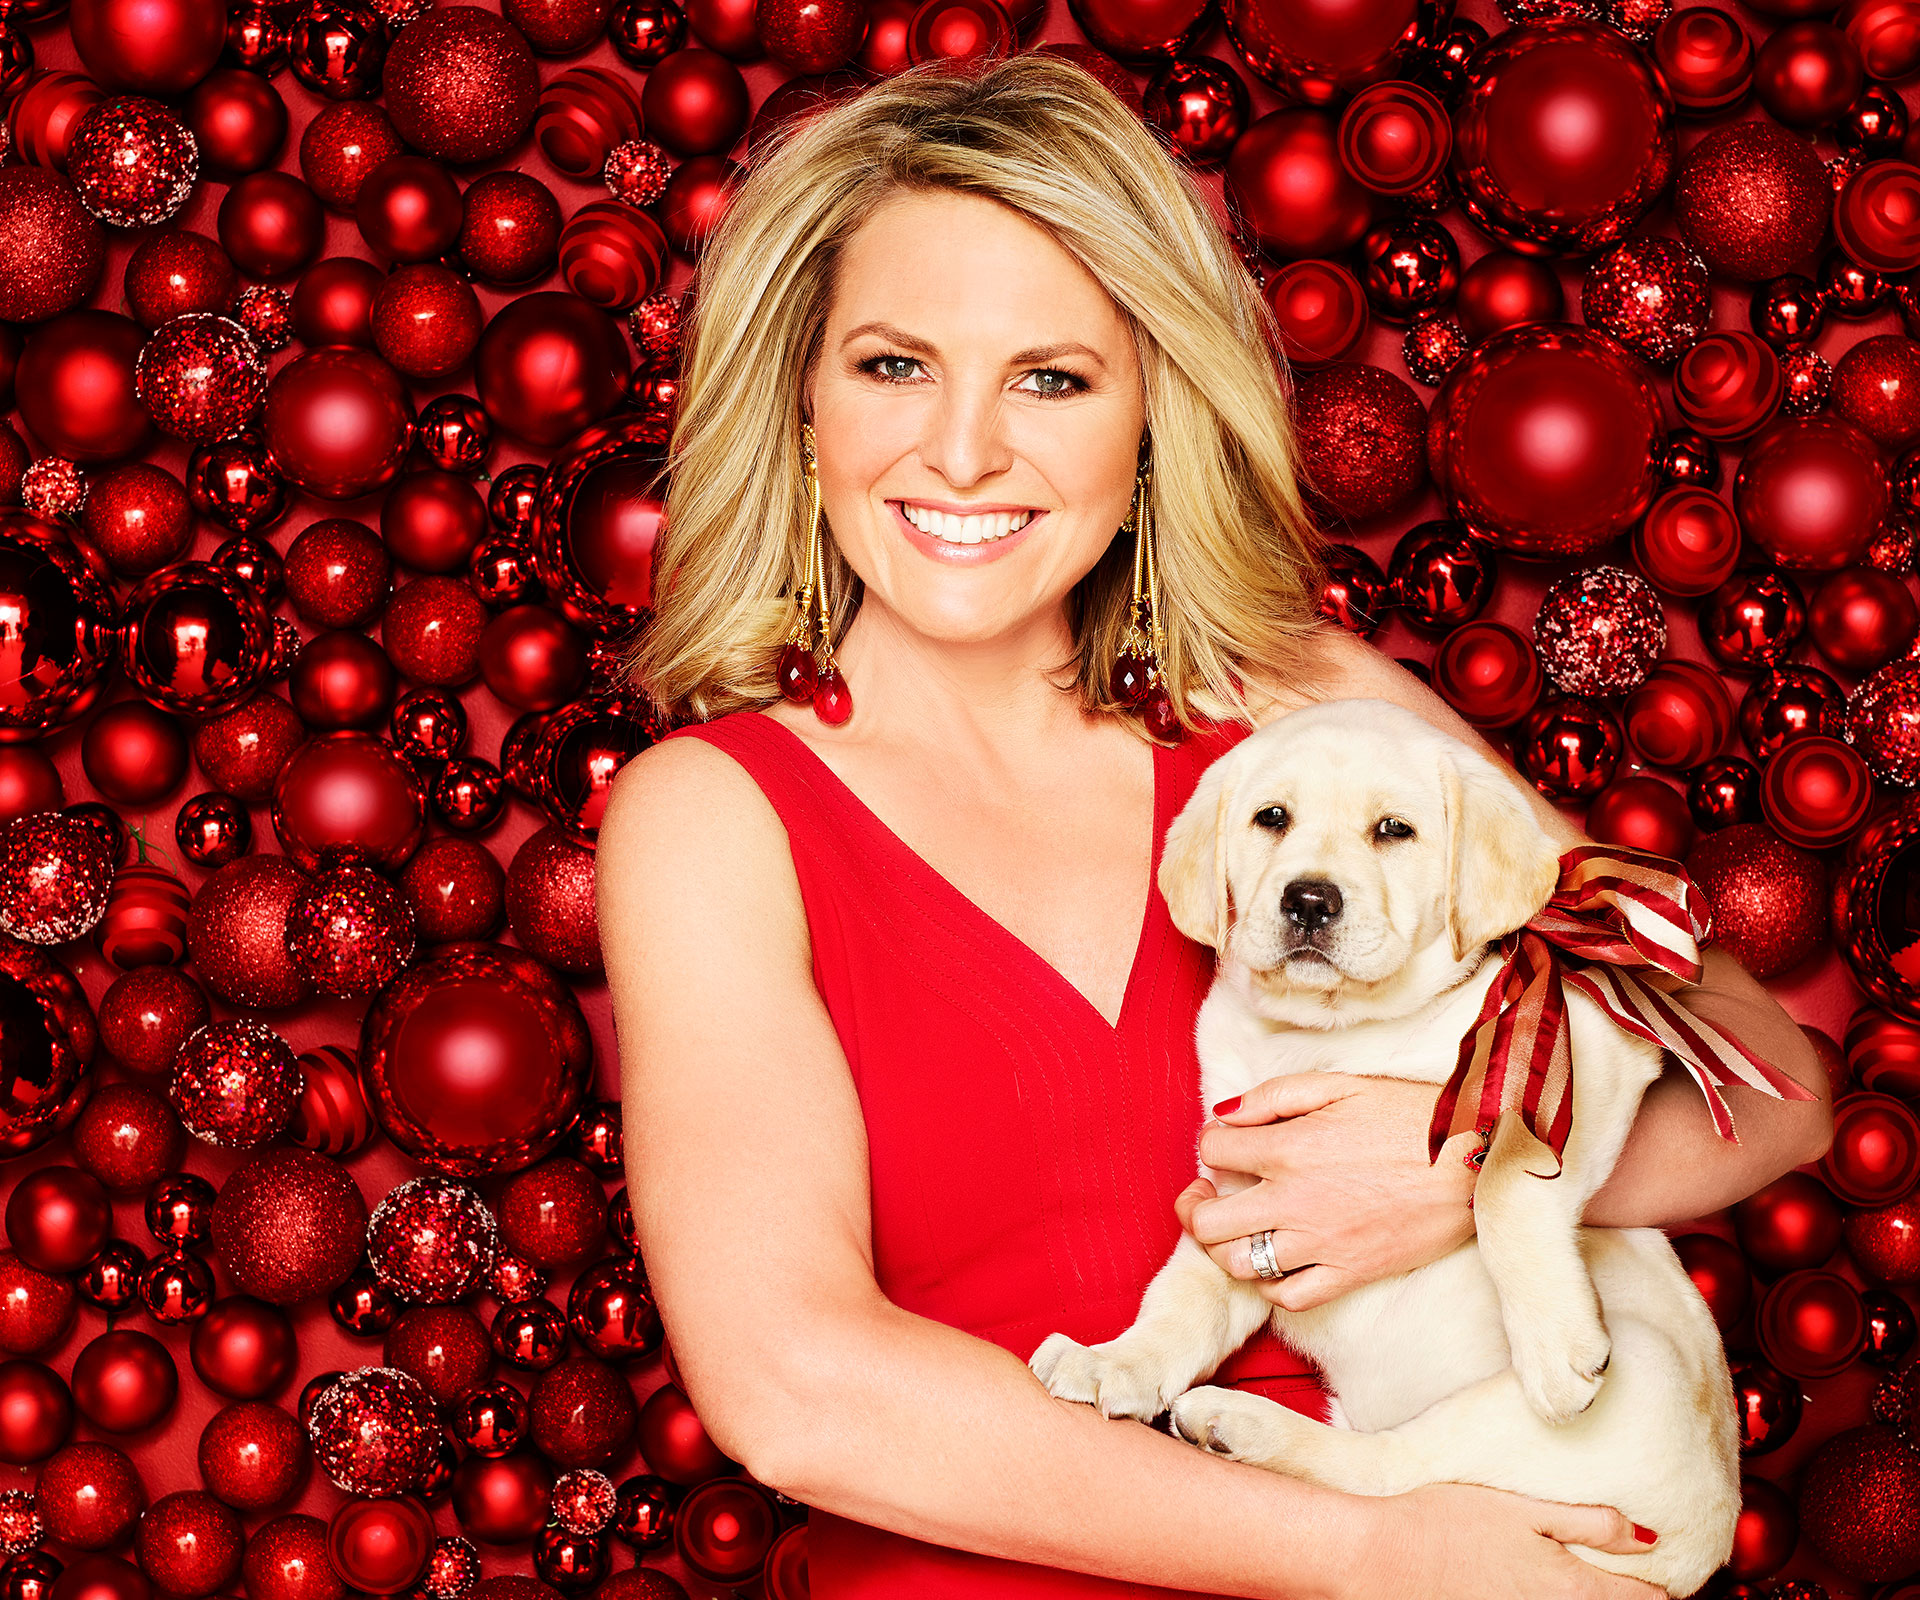 Celebrate Christmas with The Australian Women’s Weekly!